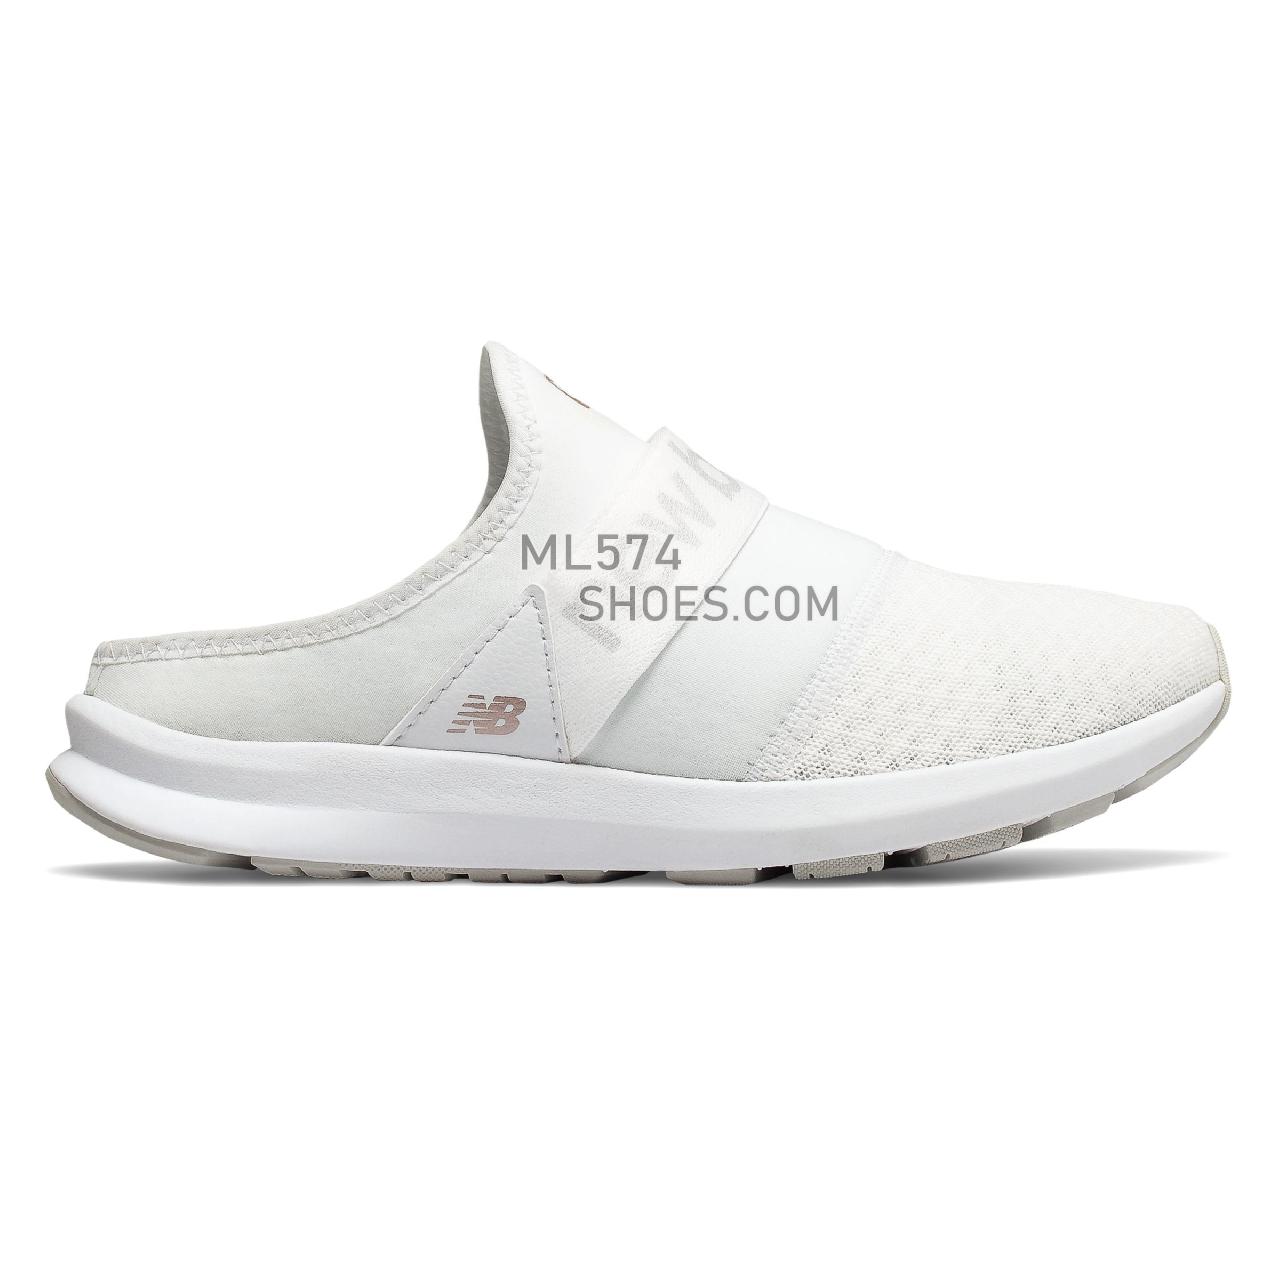 New Balance FuelCore Nergize Mule - Women's Sport Style Sneakers - White with Summer Fog - WLNRMLM1